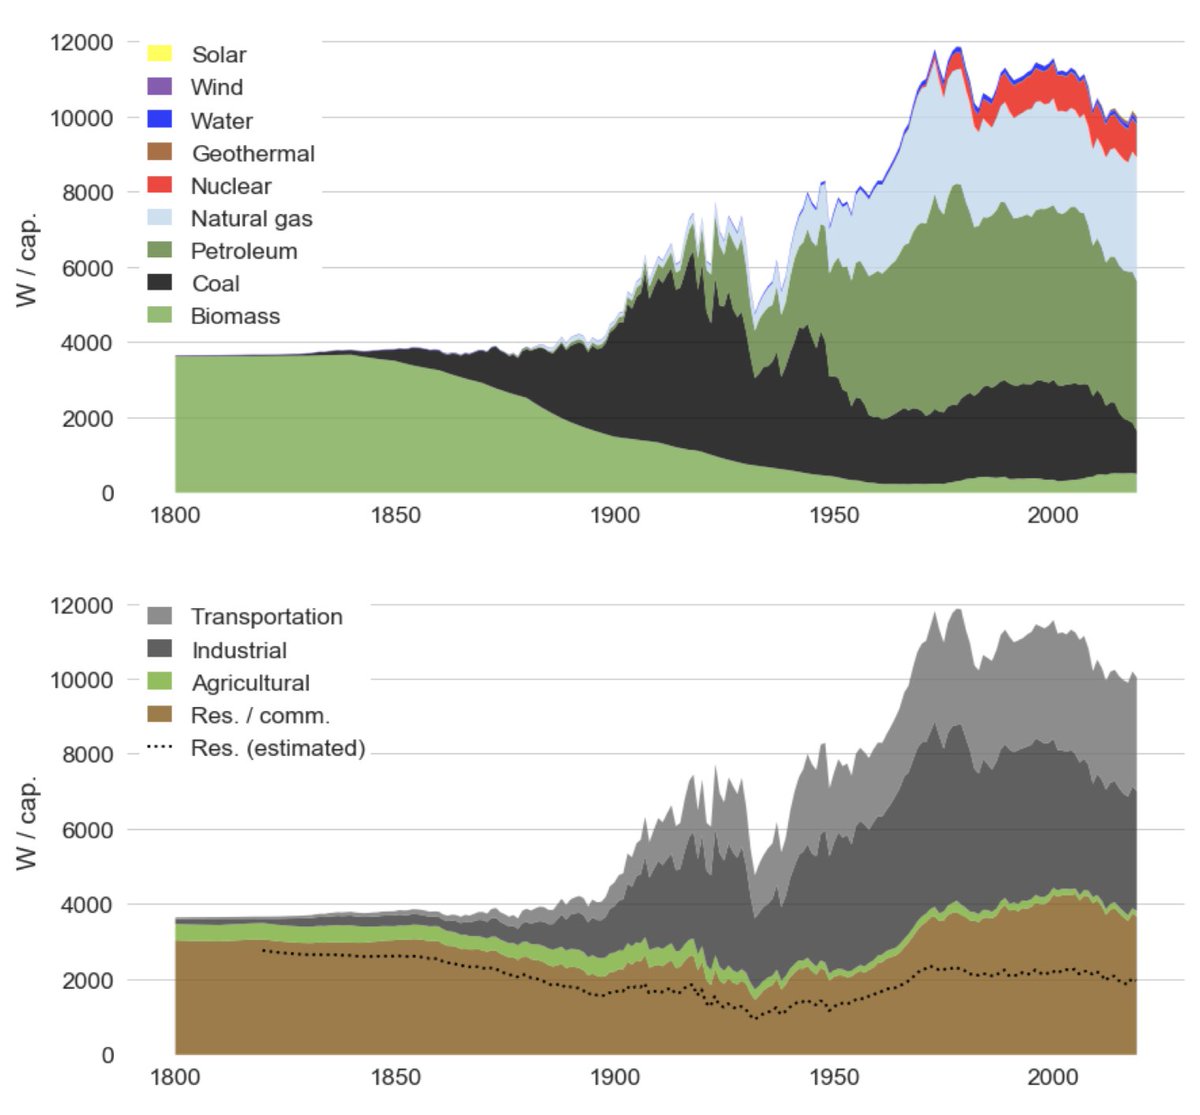 U.S. energy use and the growth of industrial and transportation sectors take off only with the railroads built after the Civil War. Lesson: midstream infrastructure is critical. No energy use without some means of supply.5/x #EnvHist